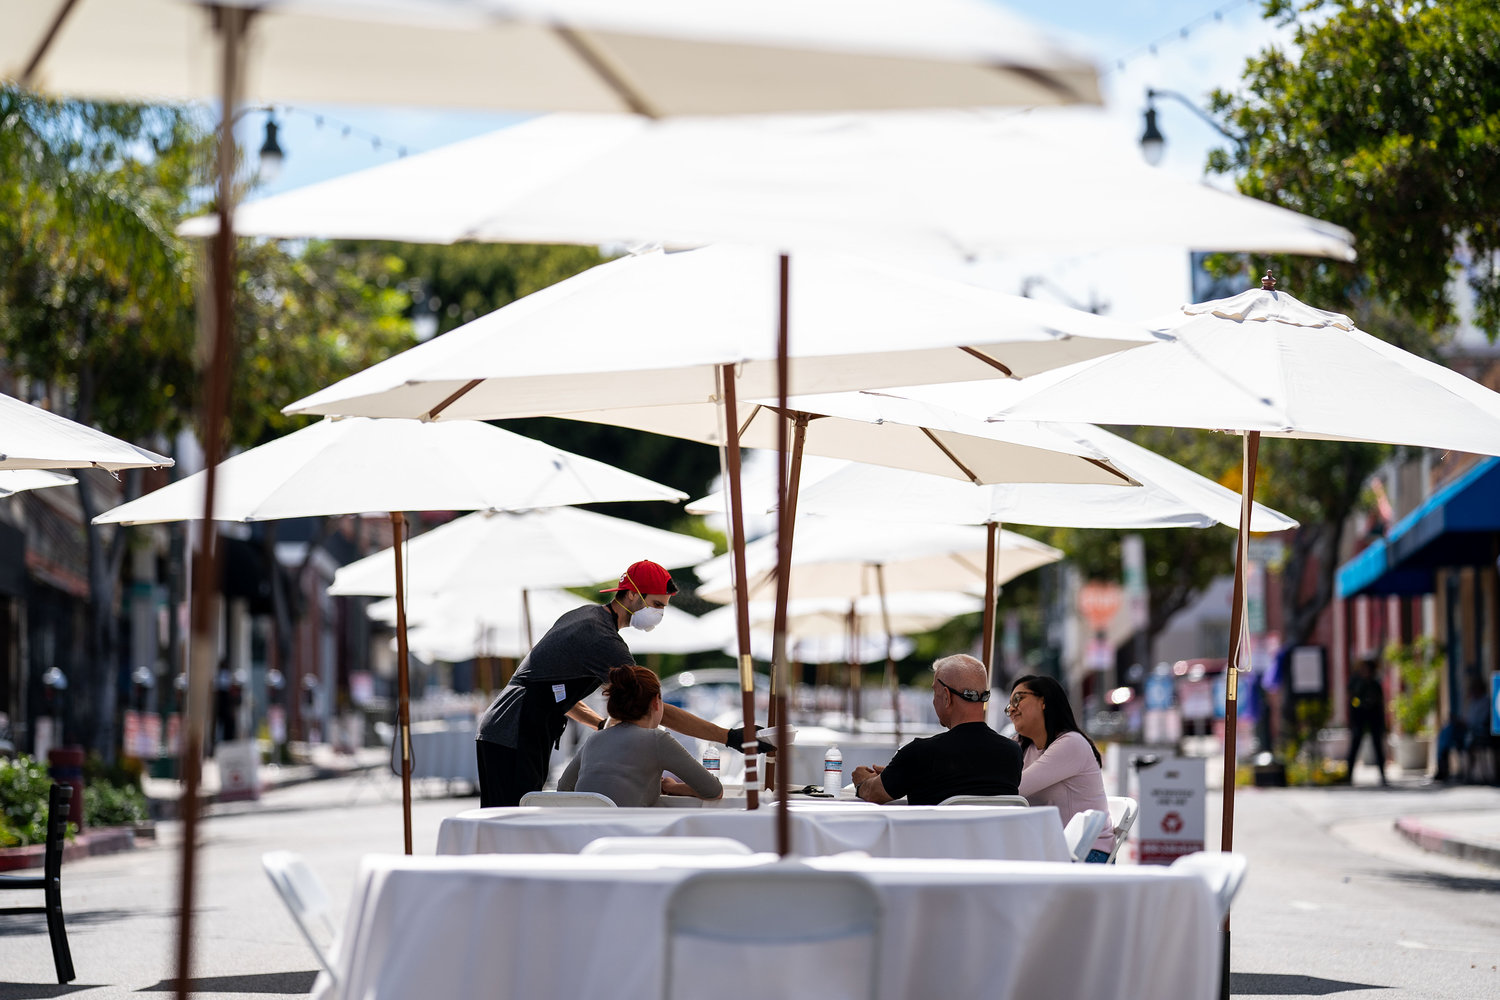 A restaurant worker serves food to people sitting at a table outside, on May 29, 2020, in San Pedro, California. (Kent Nishimura/Los Angeles Times/TNS)